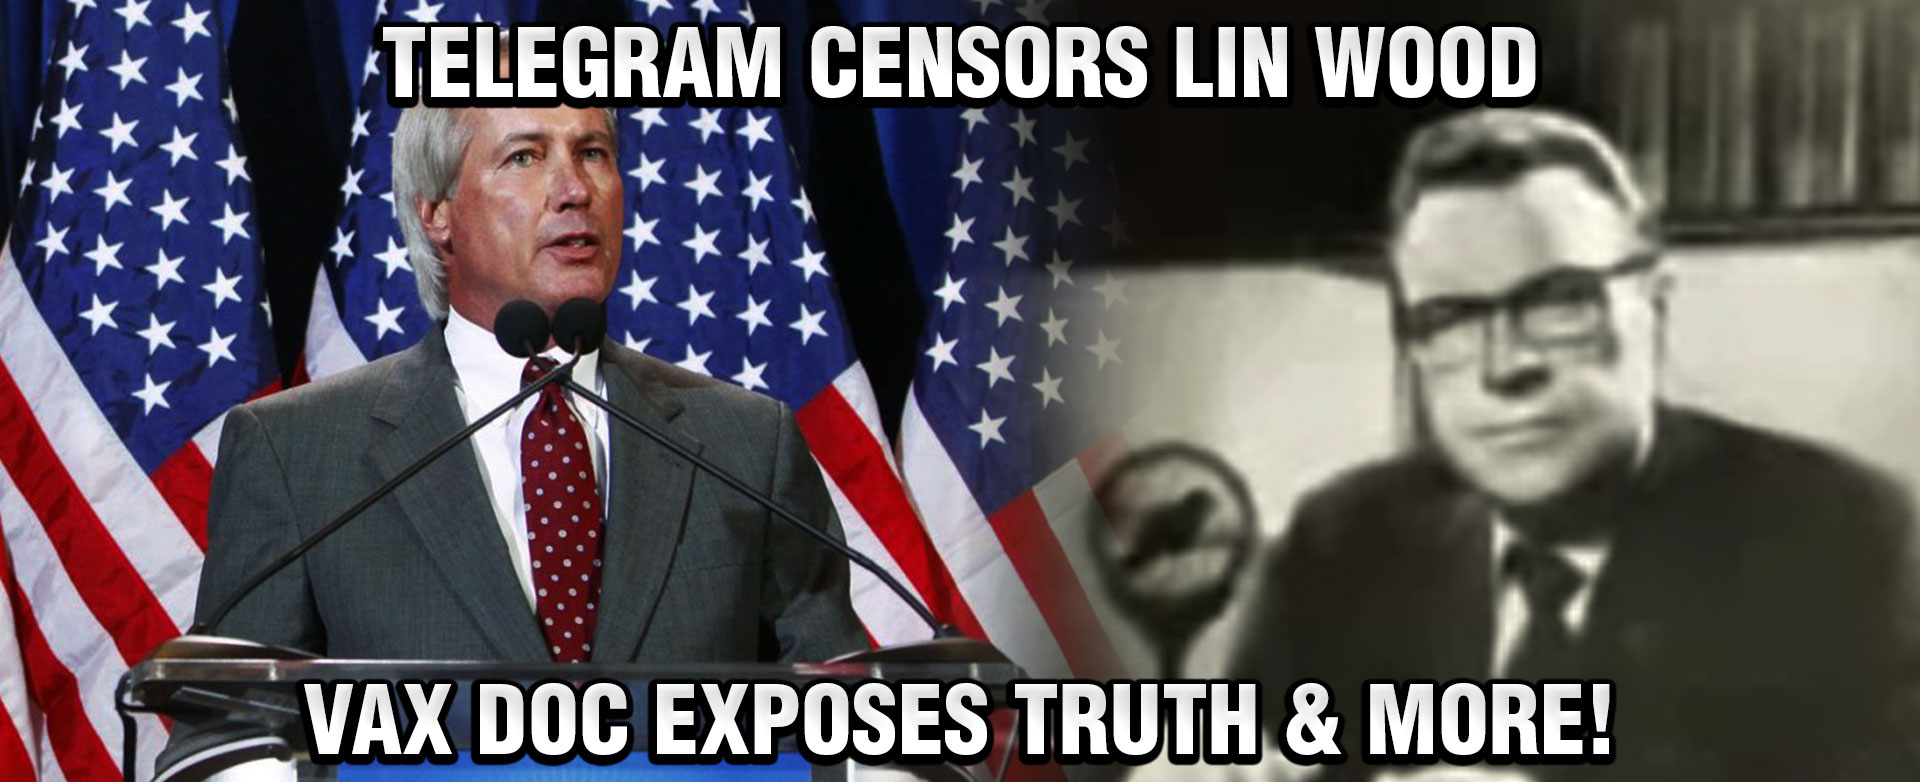 MyPatriotsNetwork-Telegram Censors Lin Wood, Vax Doc Exposes Truth & More! March 26 2021 Update